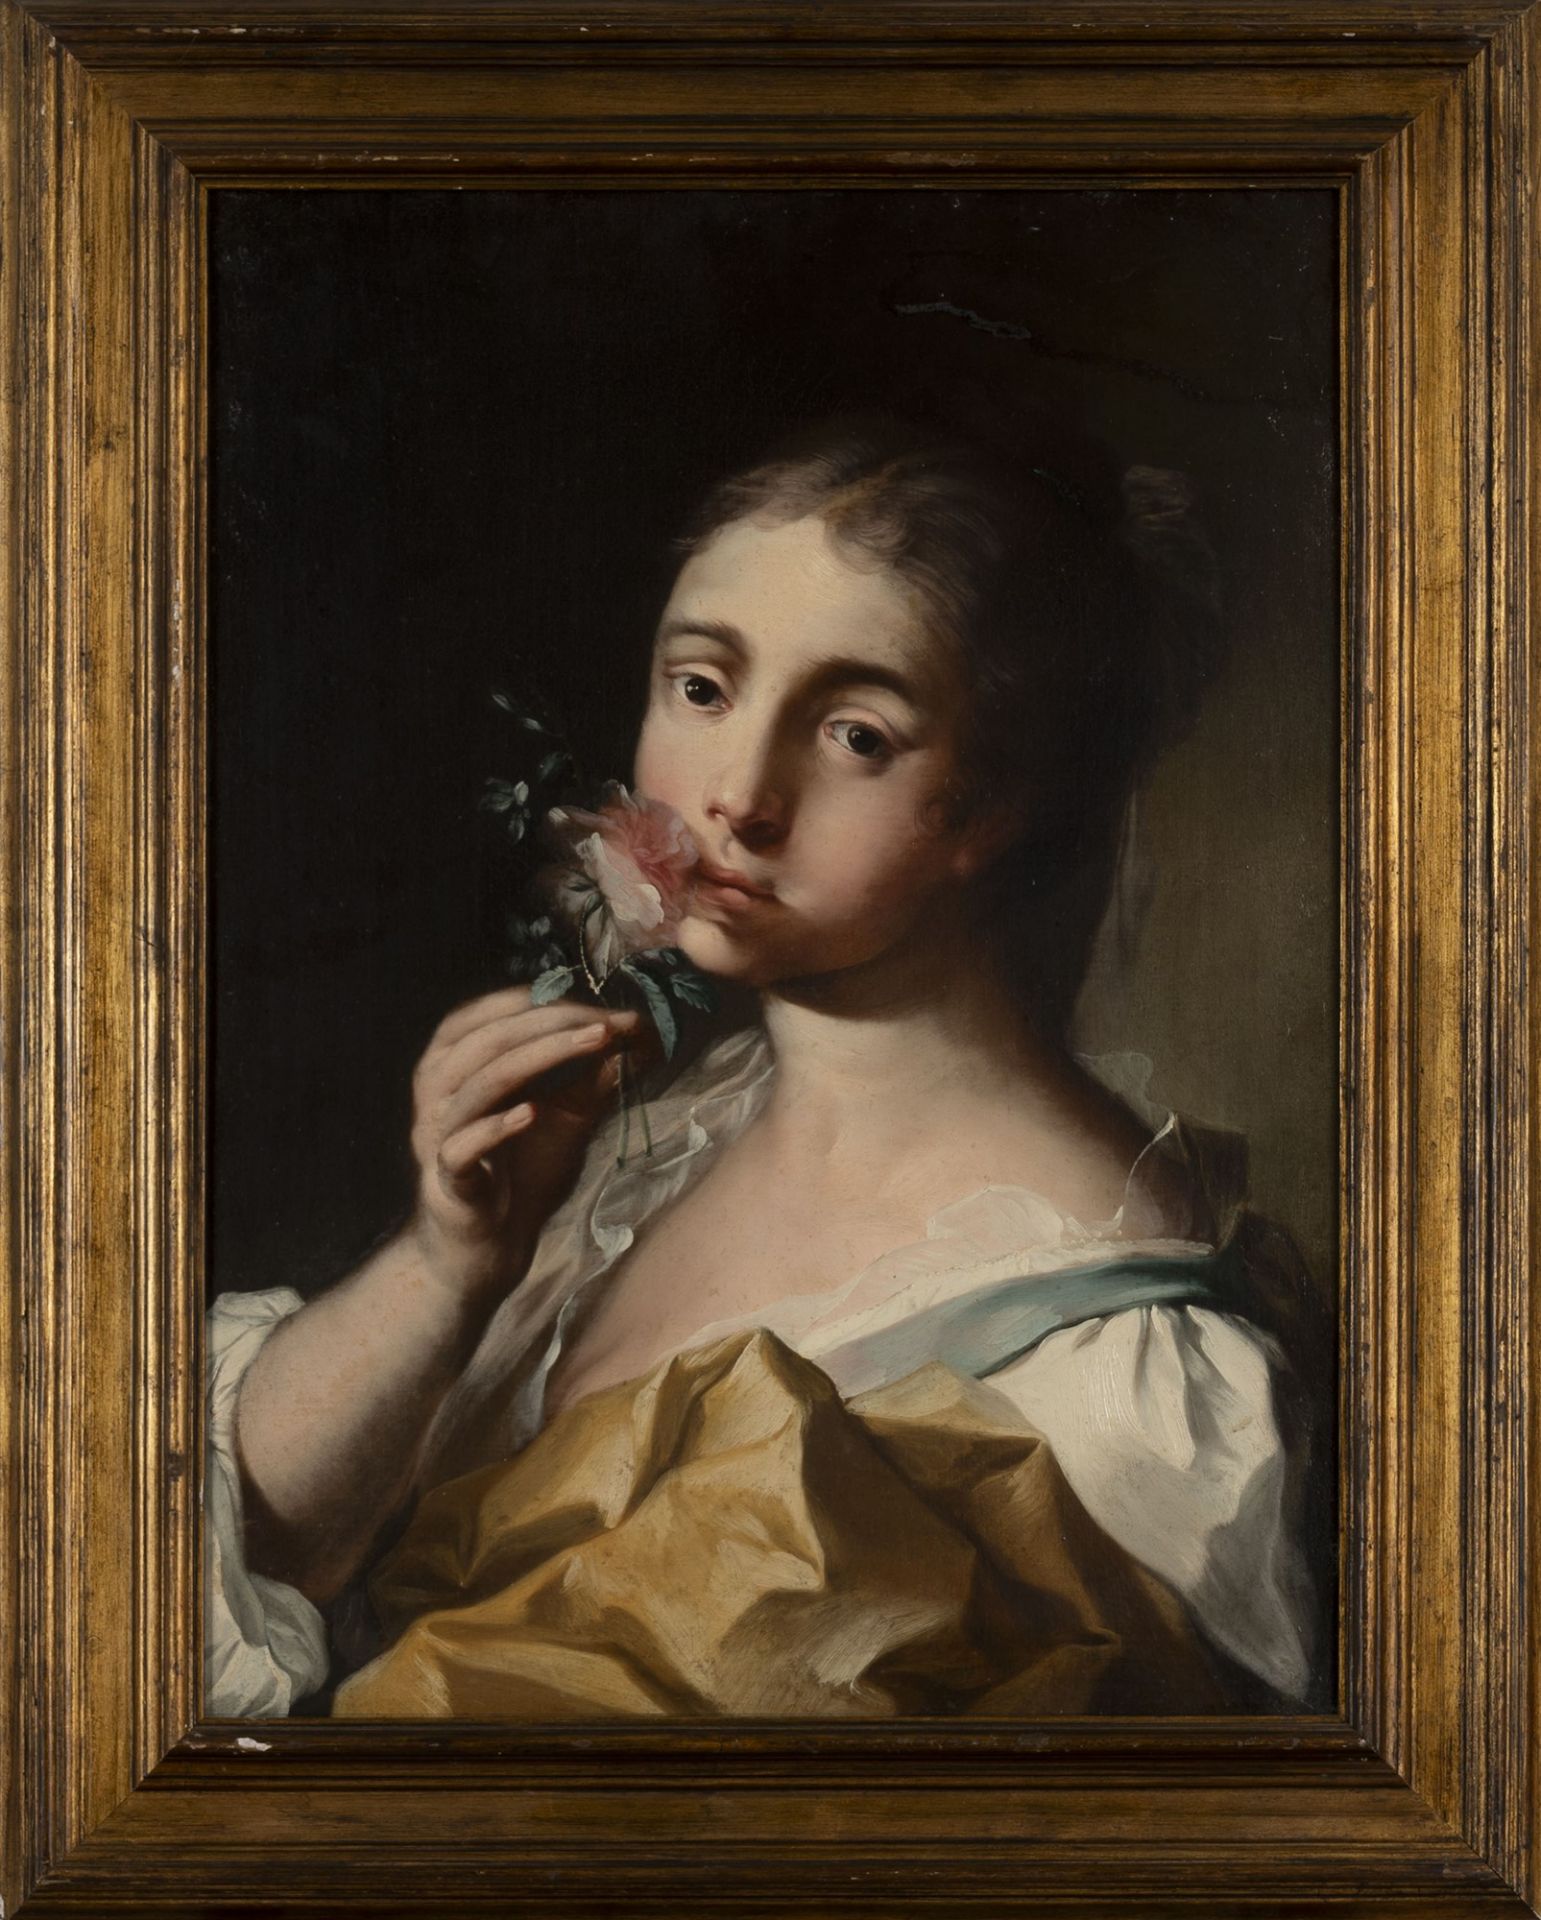 School of Northern Italy, XVIII century - Portrait of girl with rose in hand - Image 2 of 3